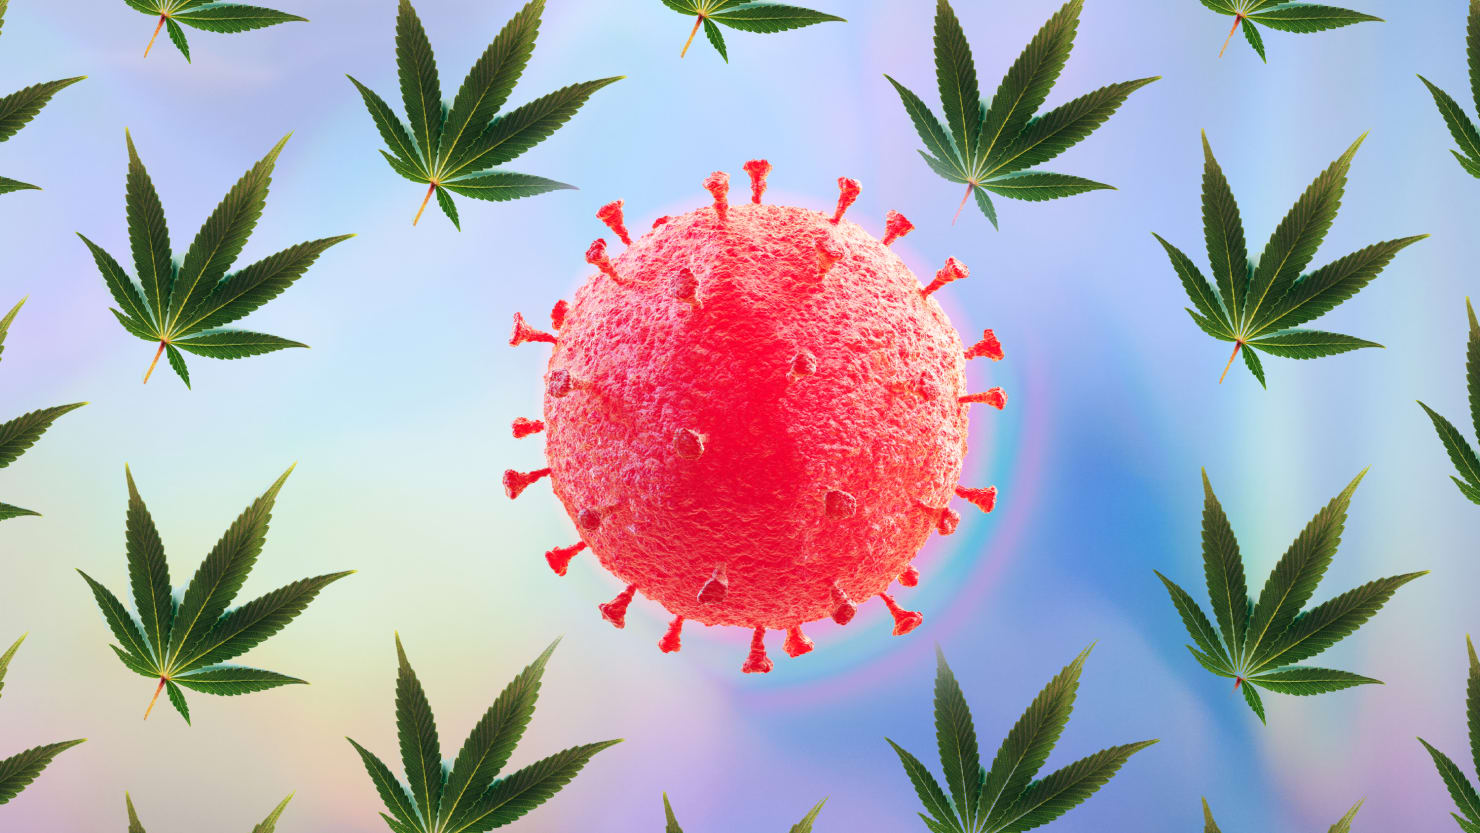 Many Clinical Trials Are Testing Whether Cannabis CBD Could Be an Effective COVID-19 Treatment